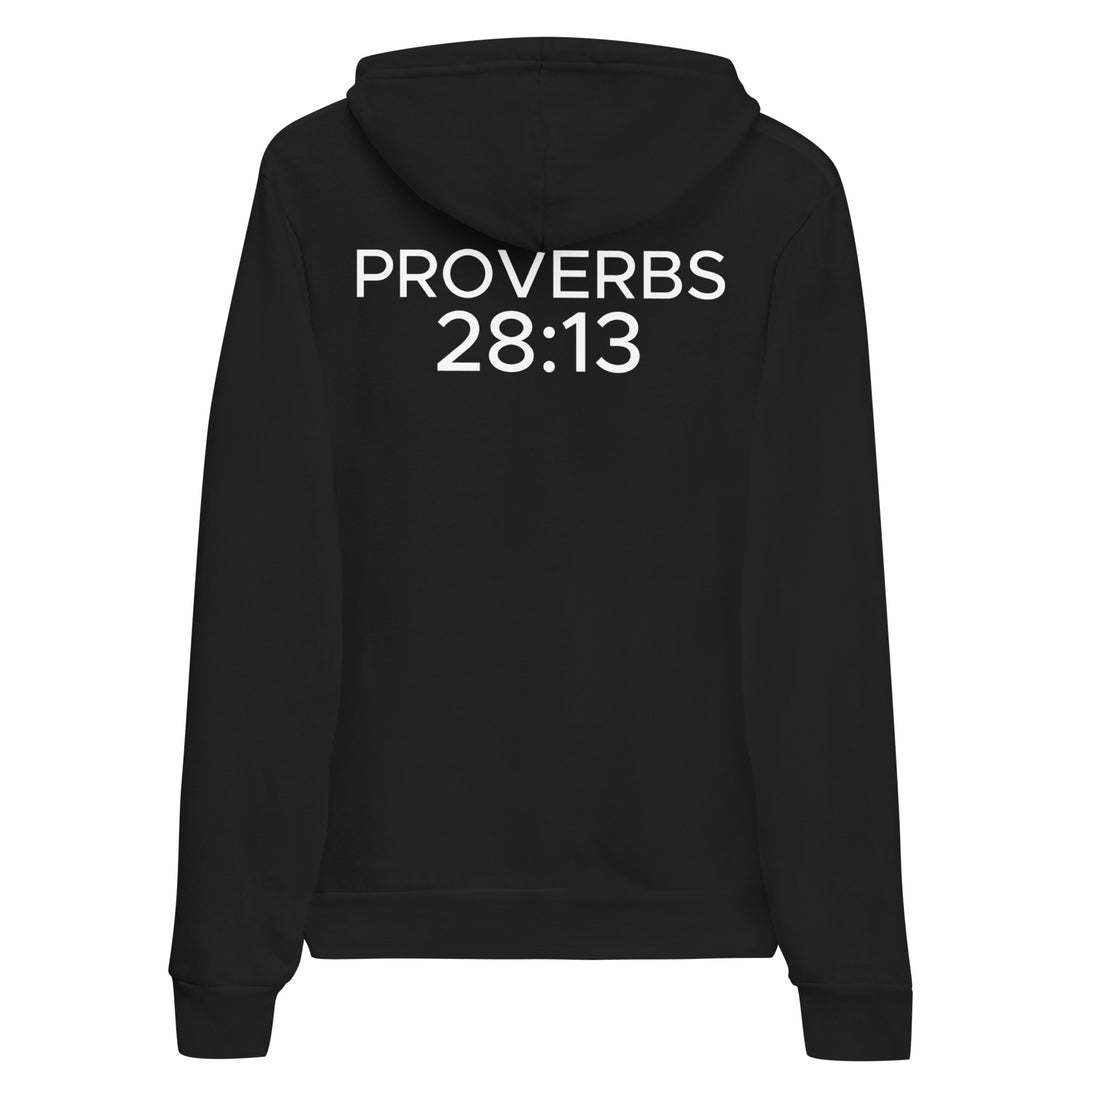 REPENT UNISEX FRONT AND BACK HOODIE